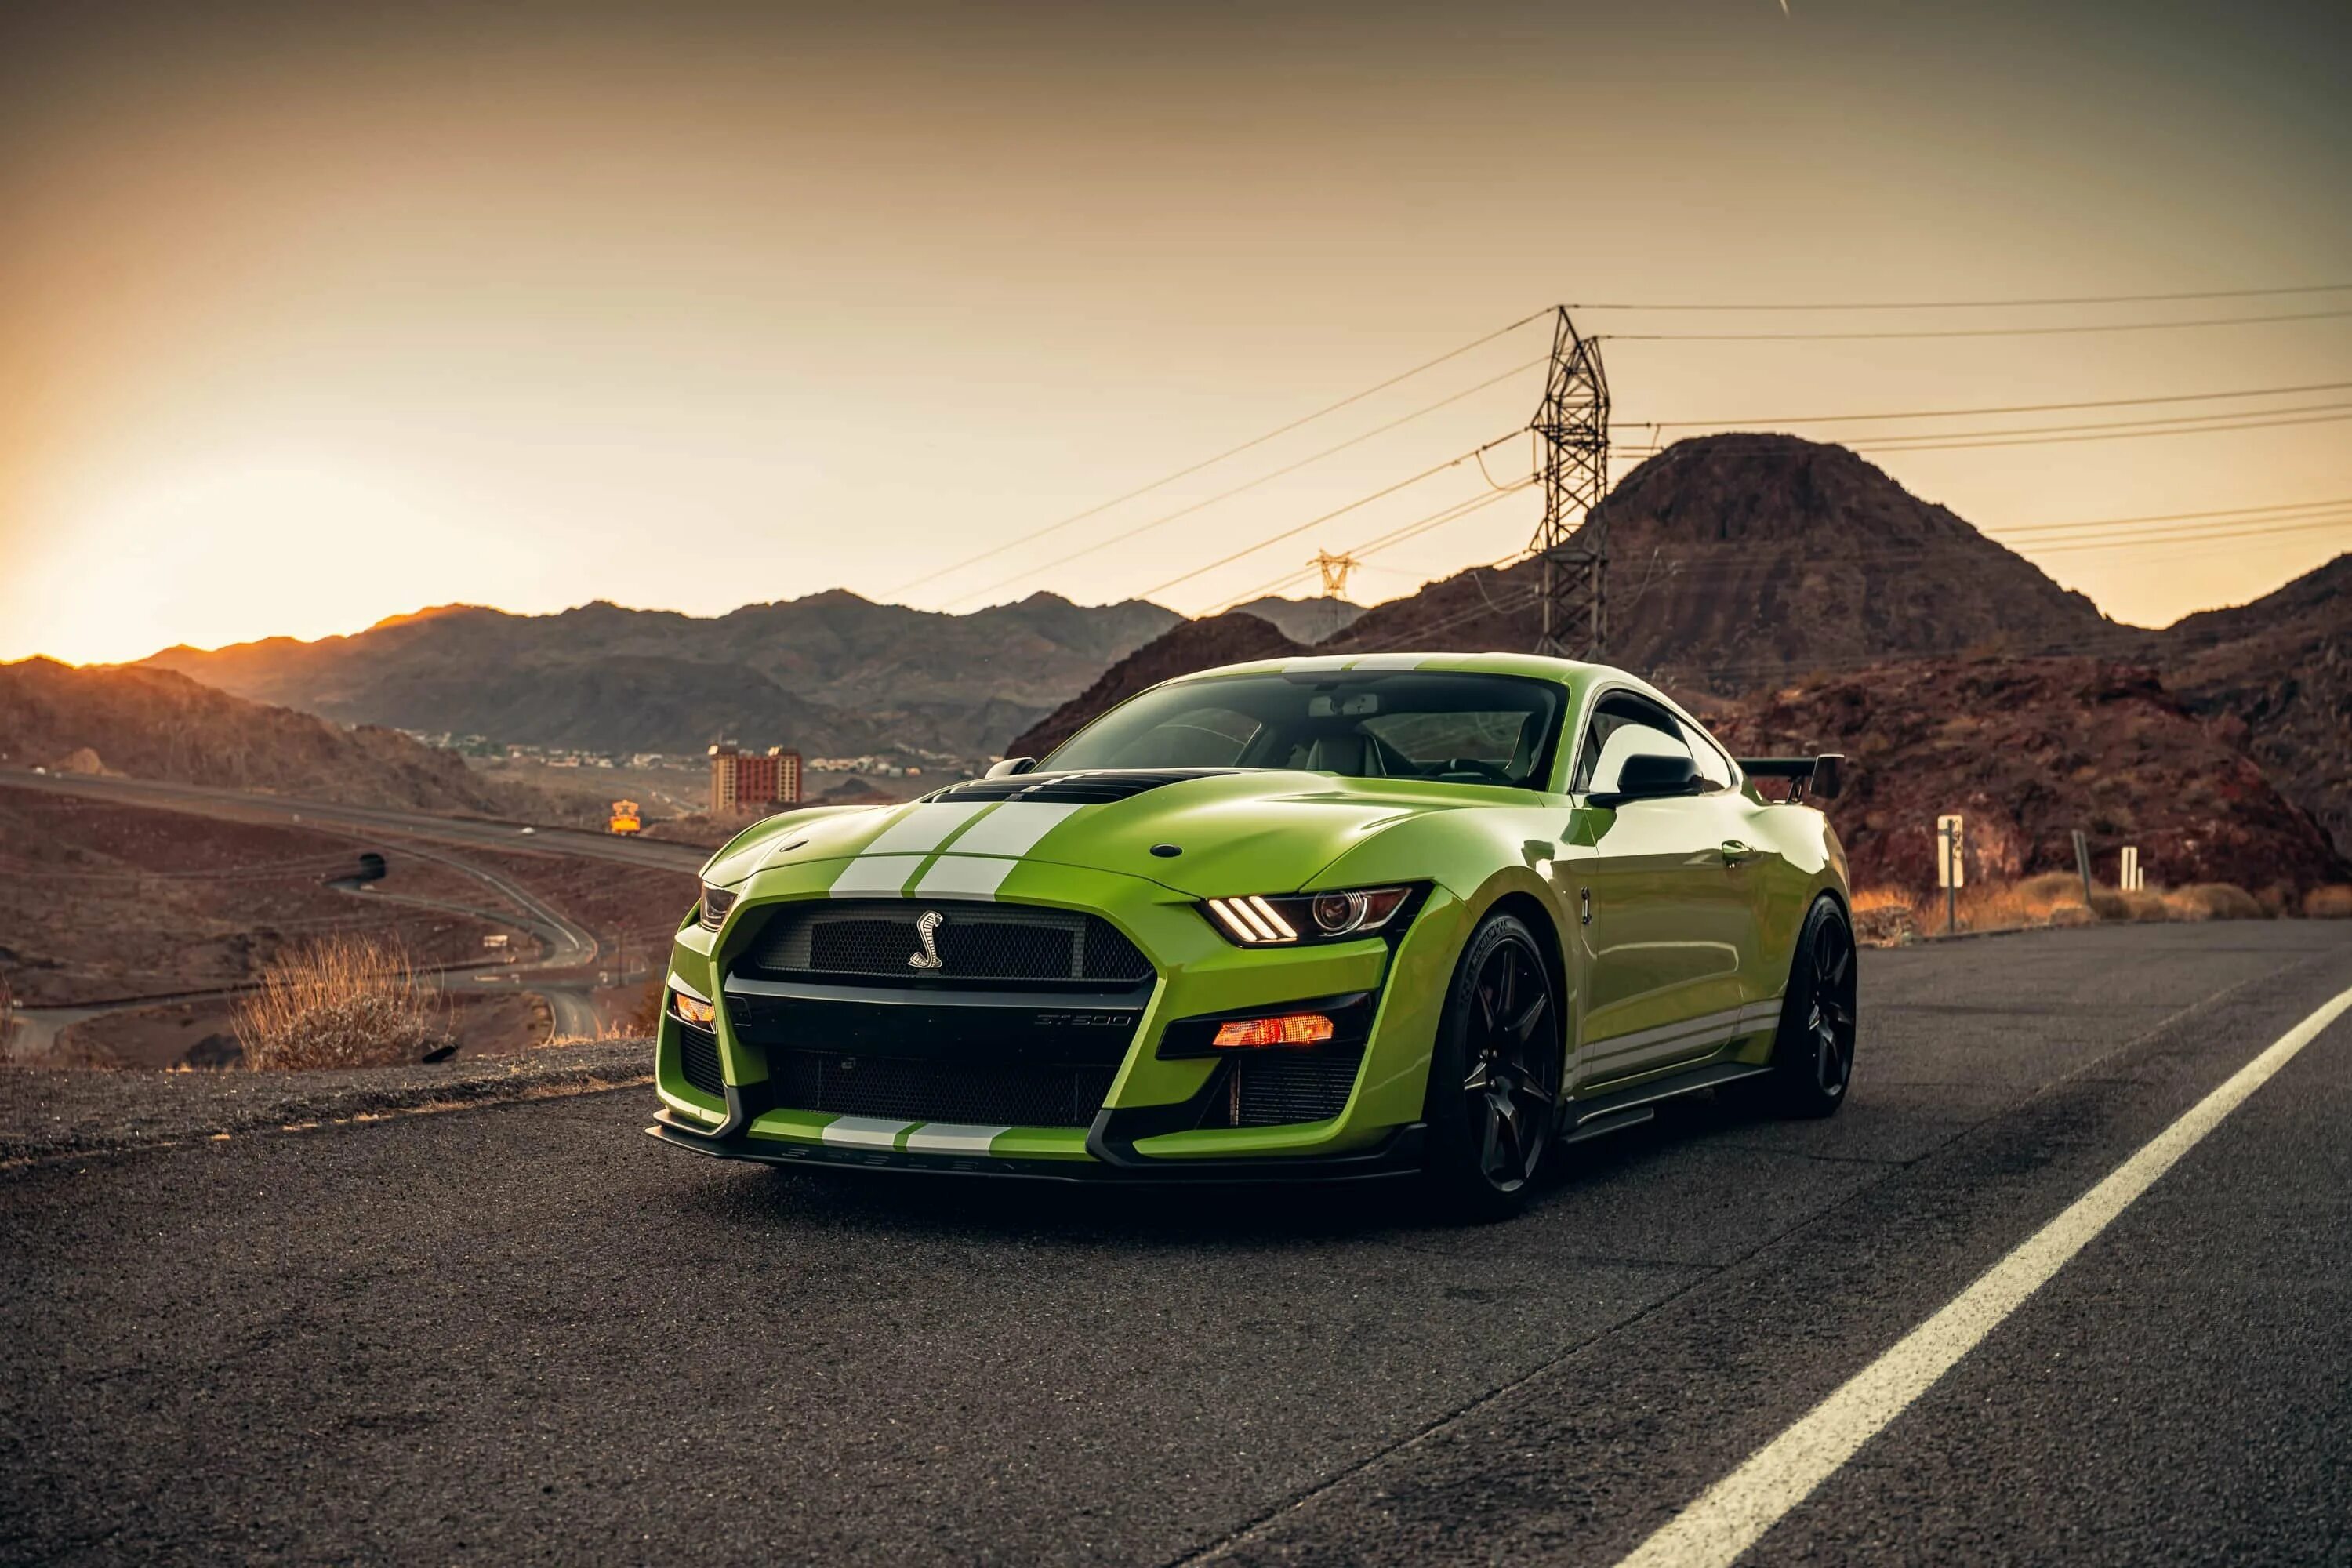 Ford Mustang Shelby gt500 лаймовый. Форд Мустанг Шелби gt 500. Ford Mustang Shelby gt500 2022. Ford Mustang Shelby gt500 Green. Стол мустанг